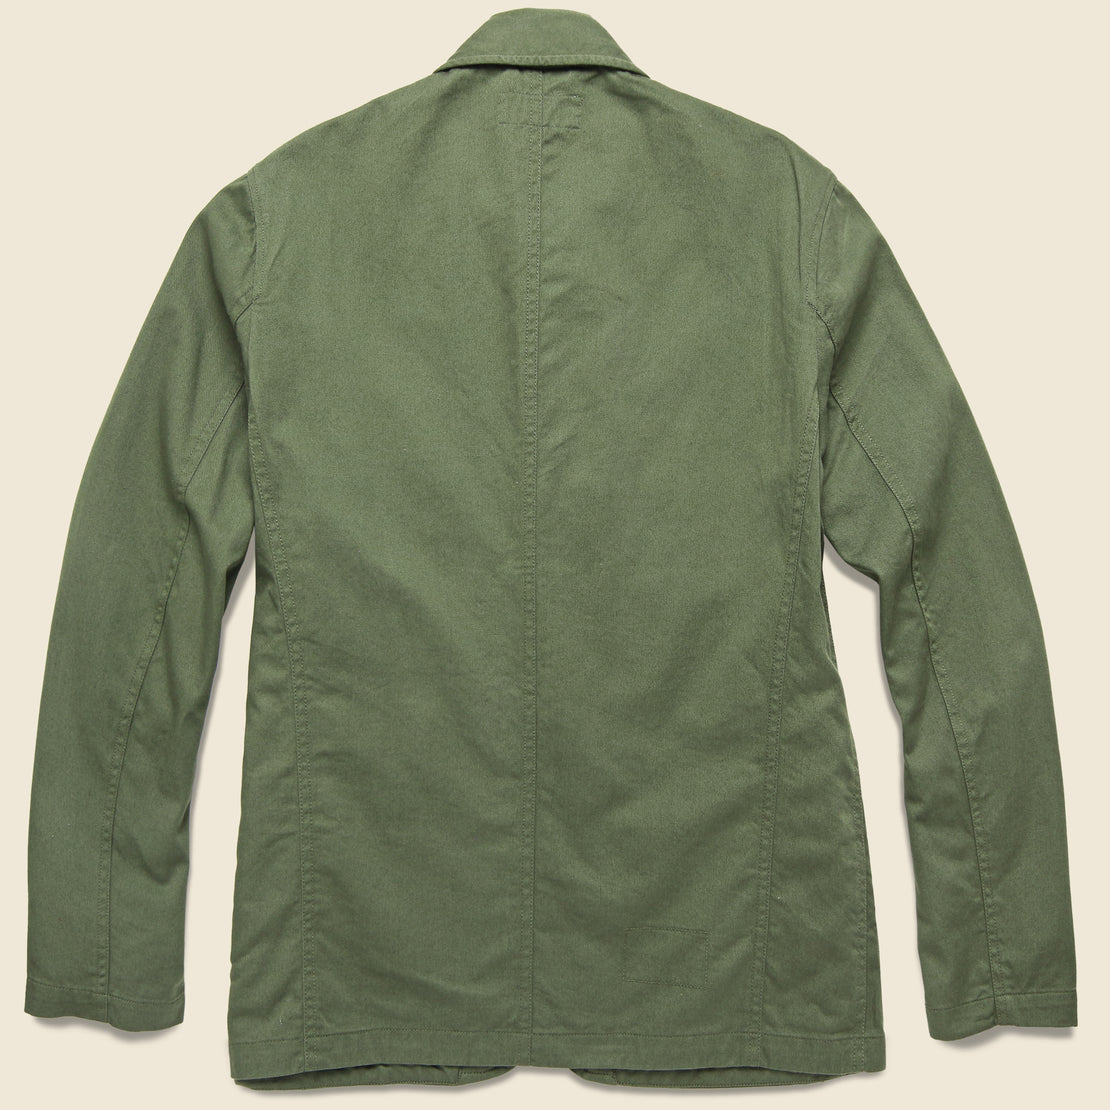 Bakers Jacket - Light Olive - Universal Works - STAG Provisions - Outerwear - Coat / Jacket